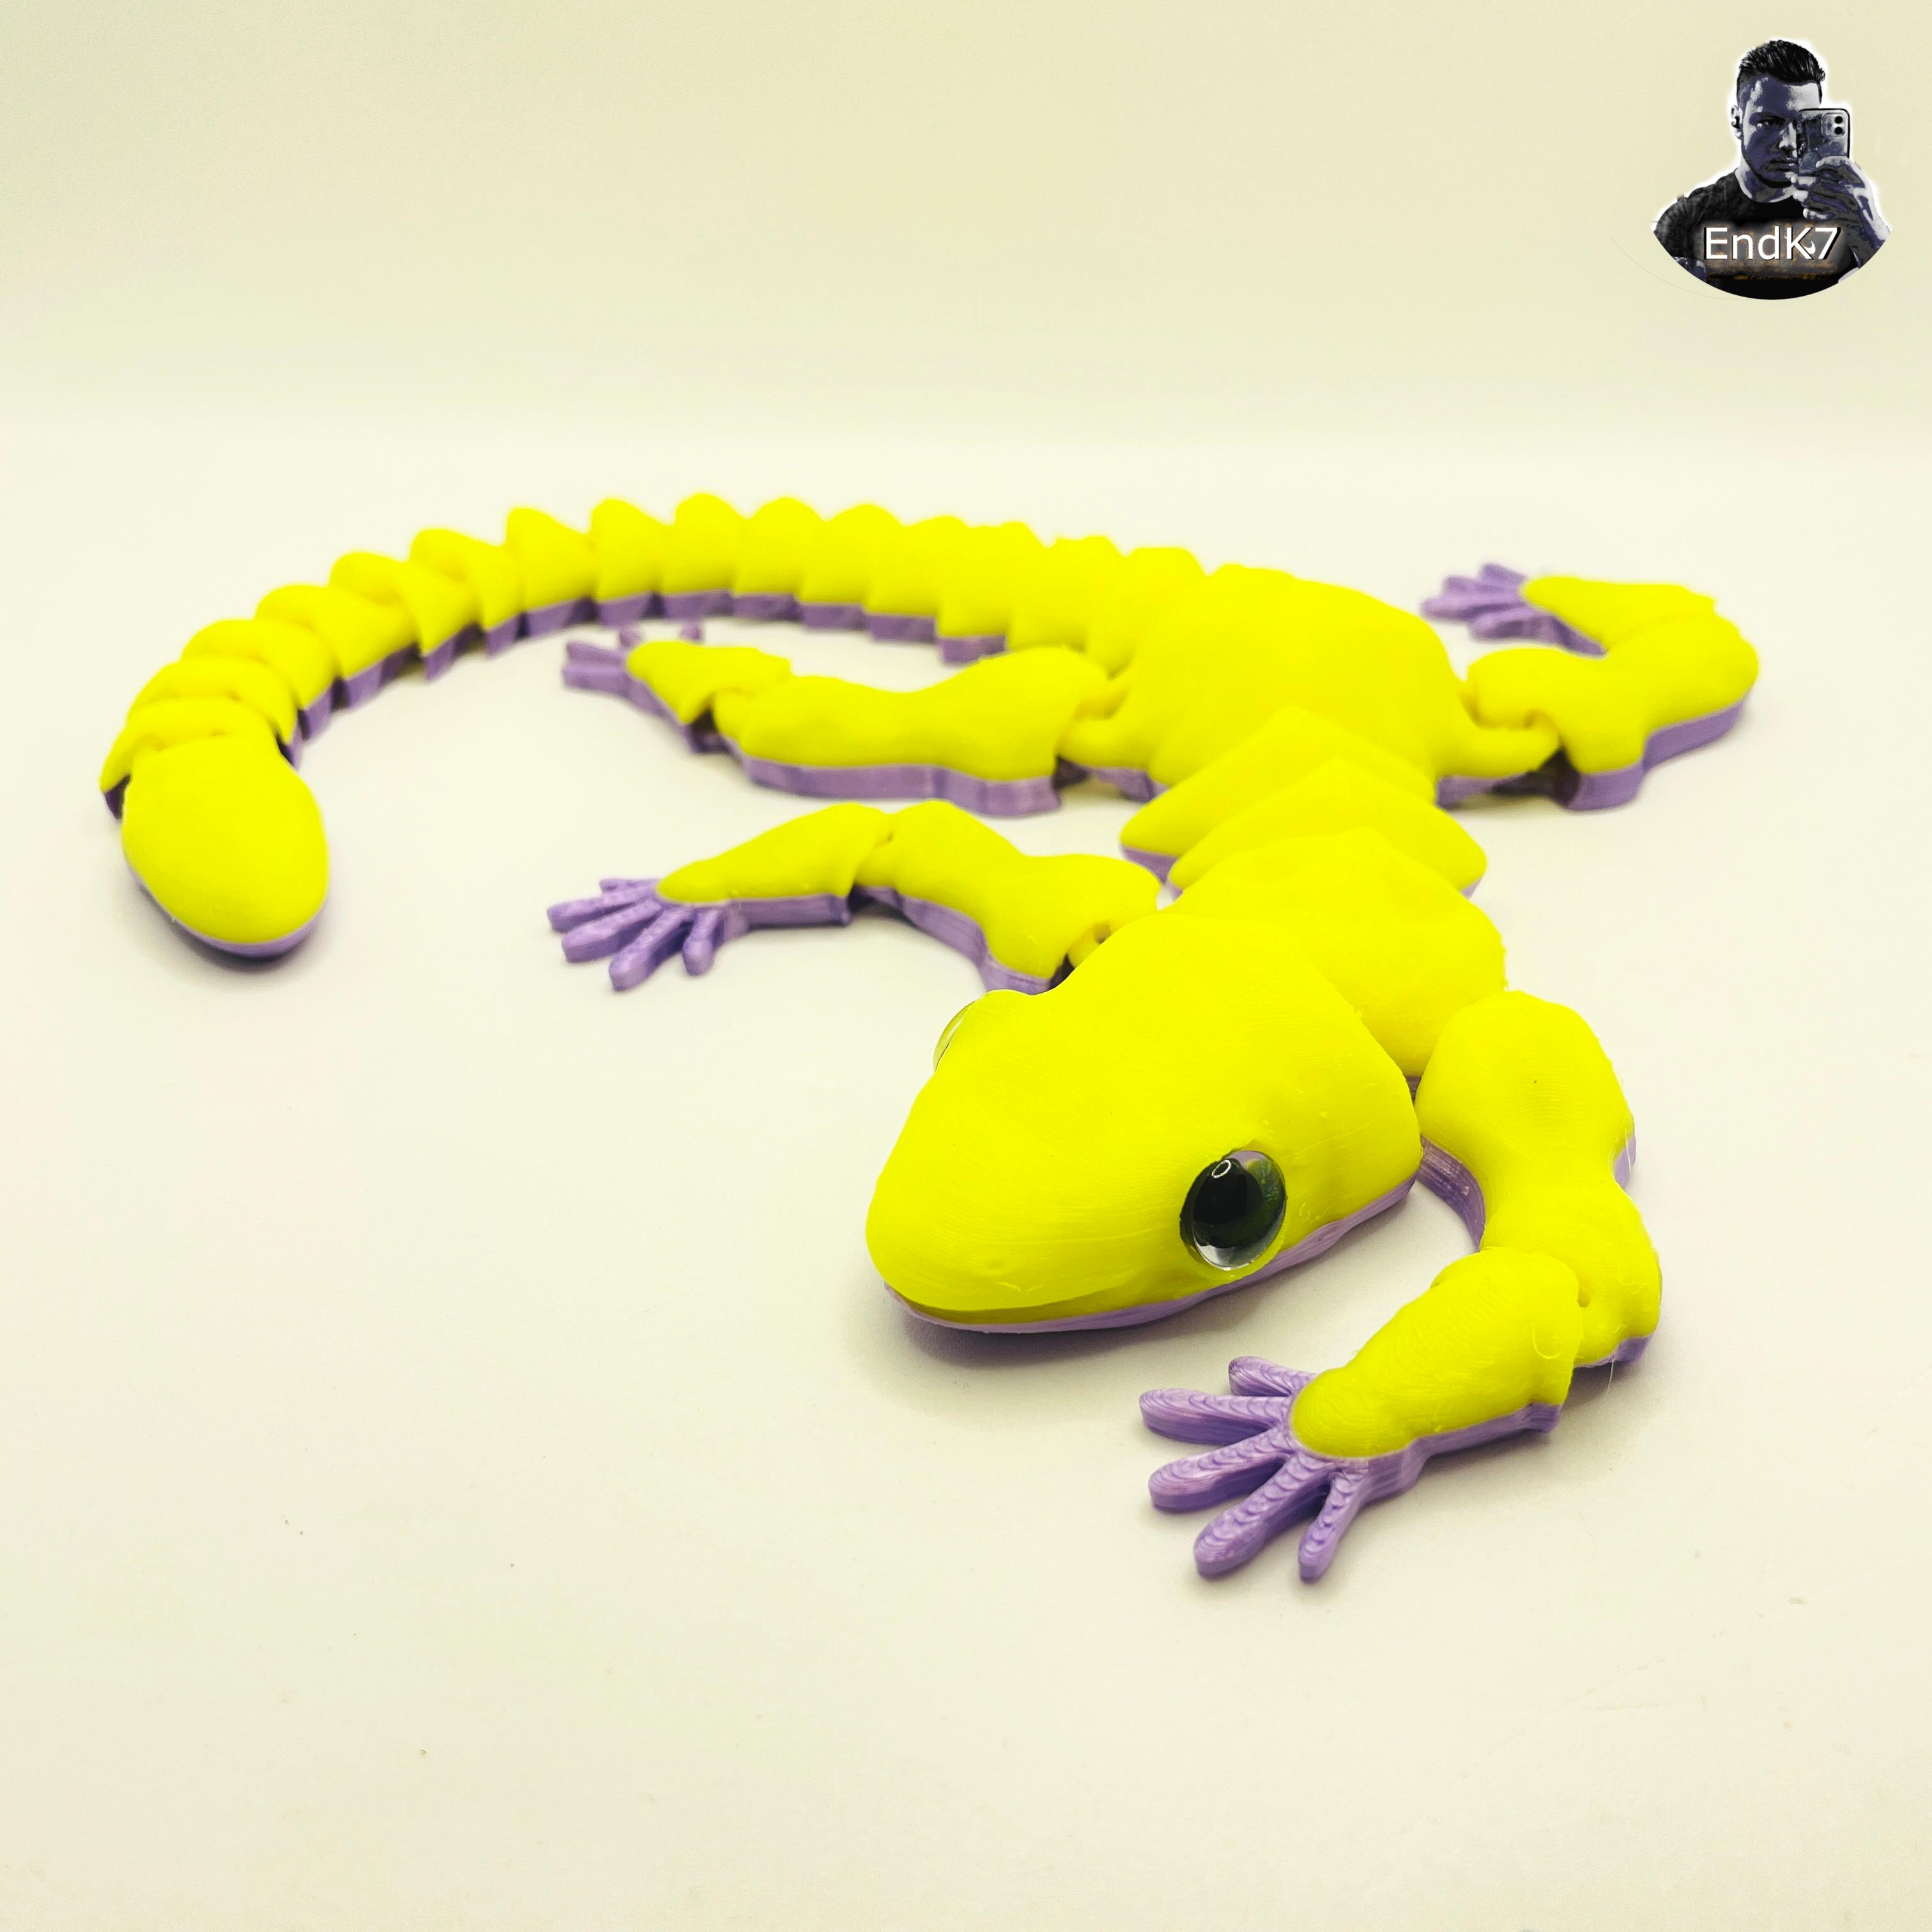 Funny Lizard Gecko - Articulated - Print in Place - No Supports - Flexi 3d model